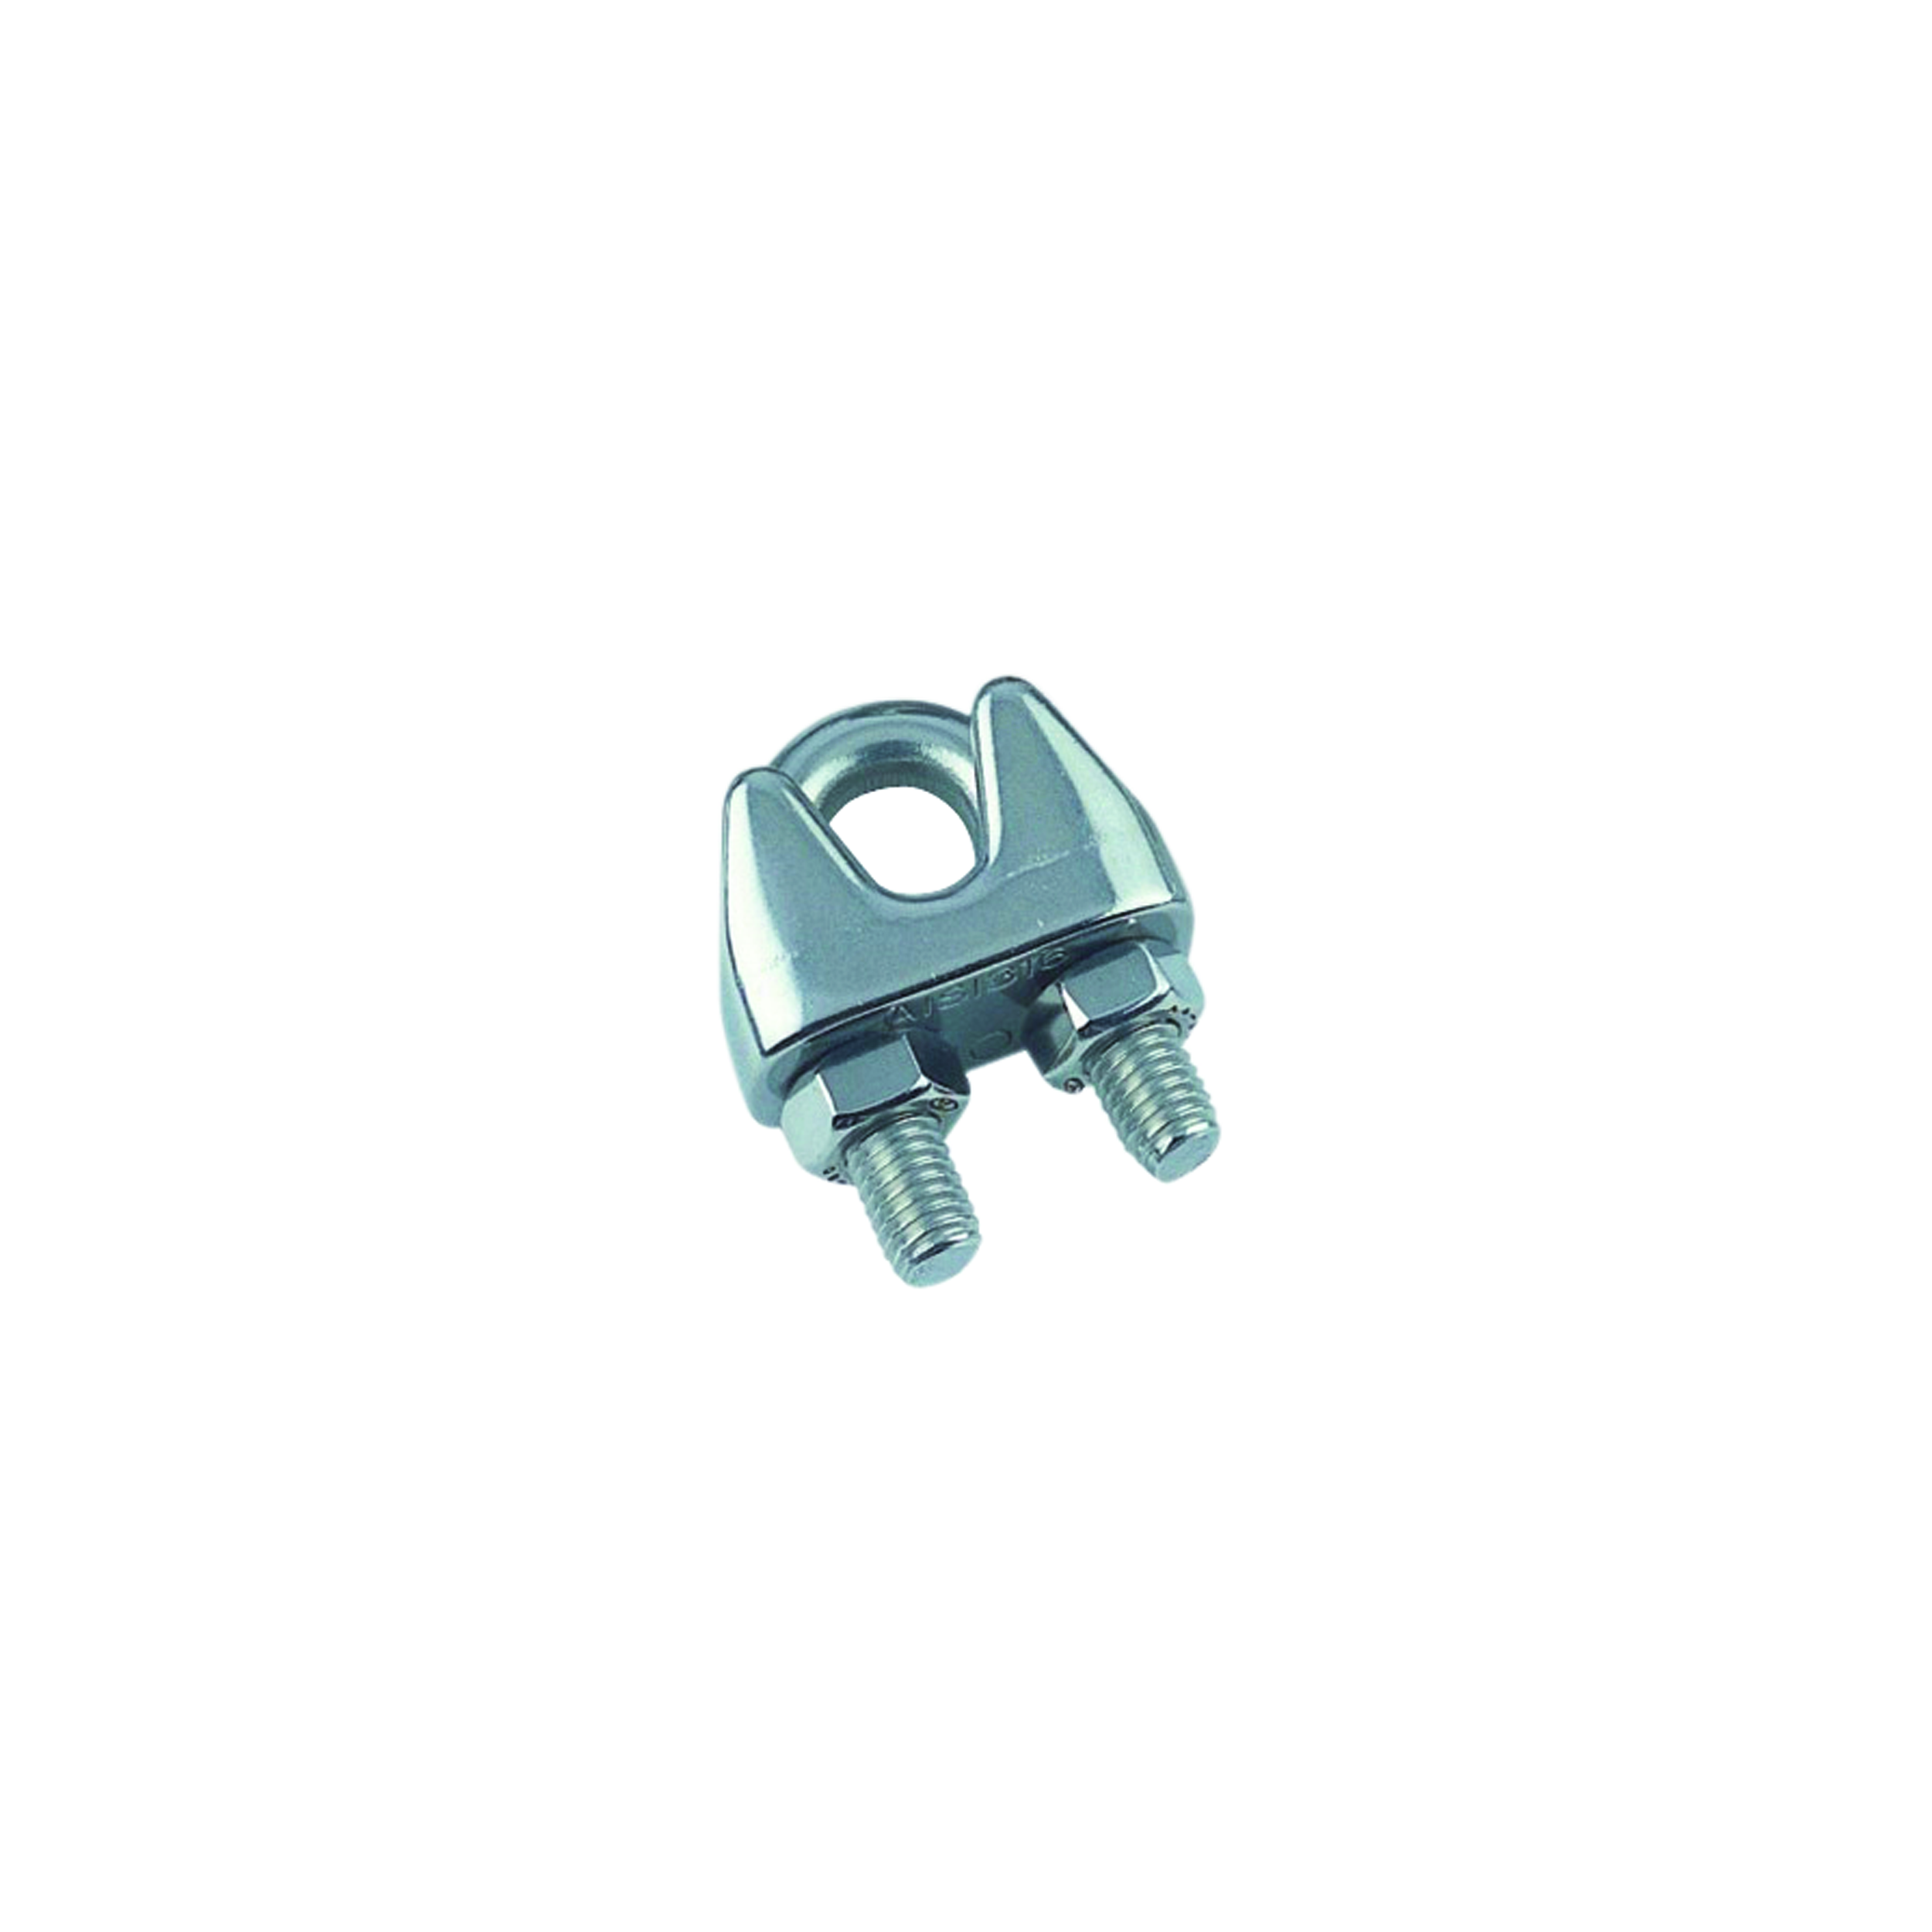 20 STCK / PCS. Wire rope clip A4  4mm